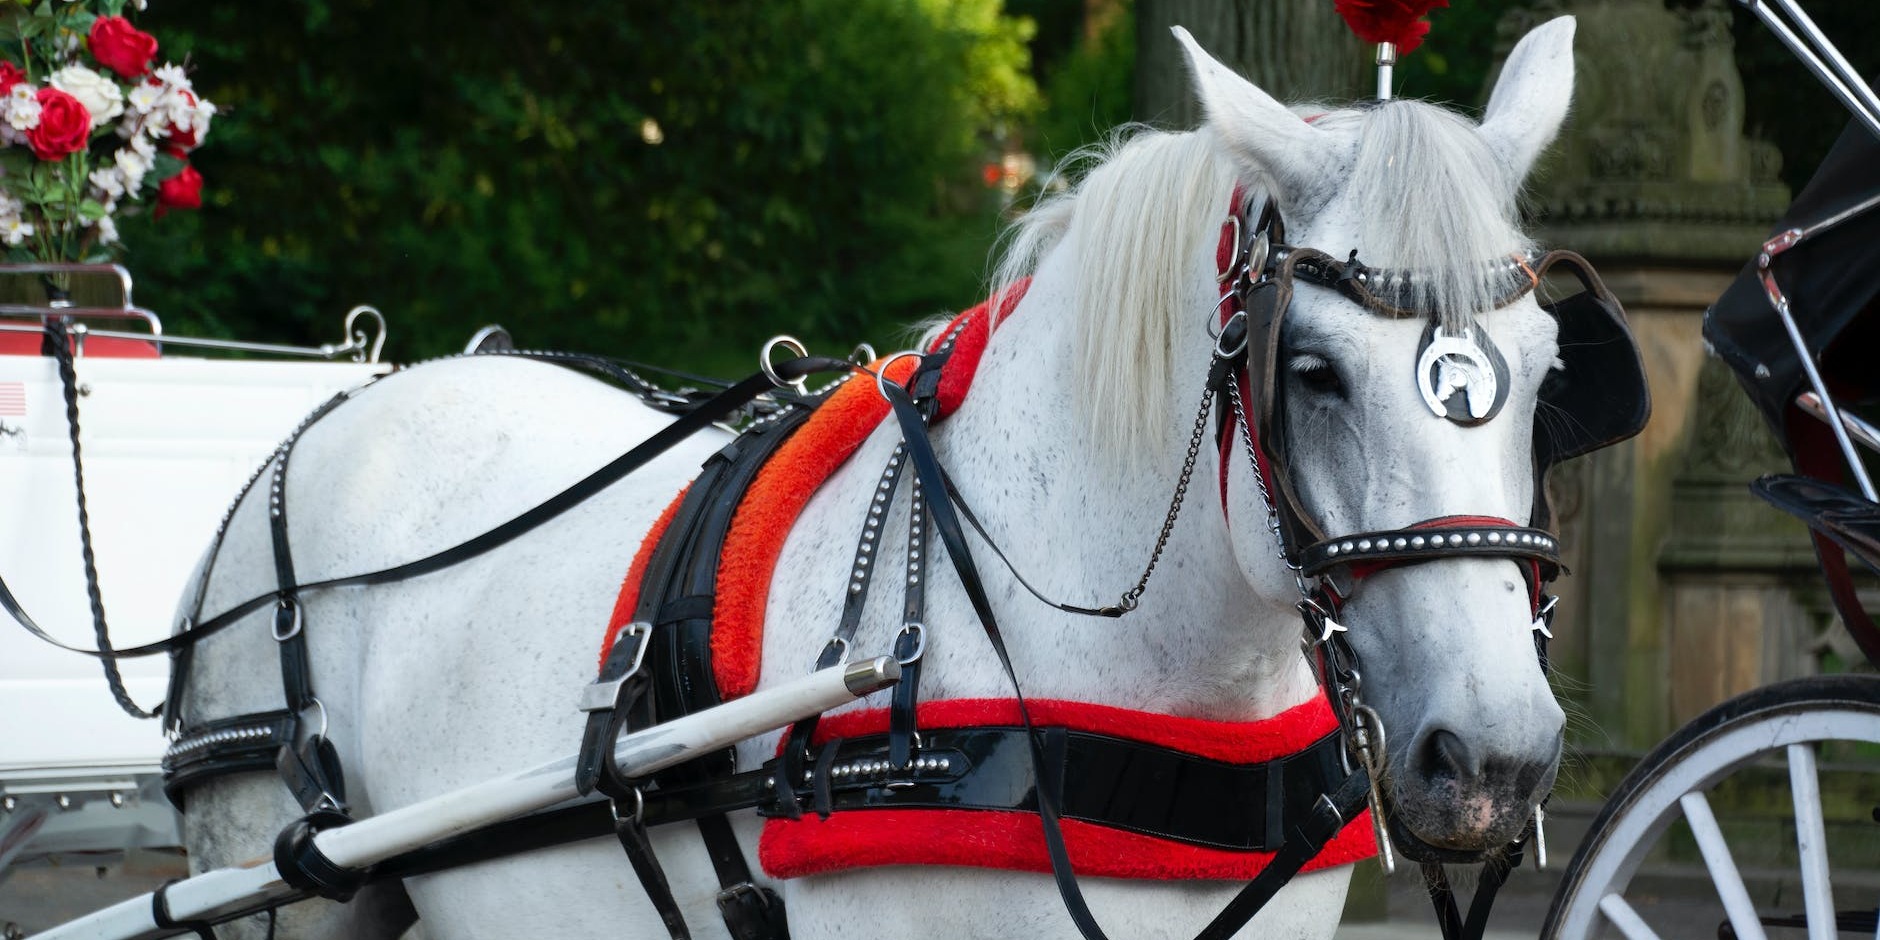 The Complete Guide to Hiring a Horse and Carriage in London